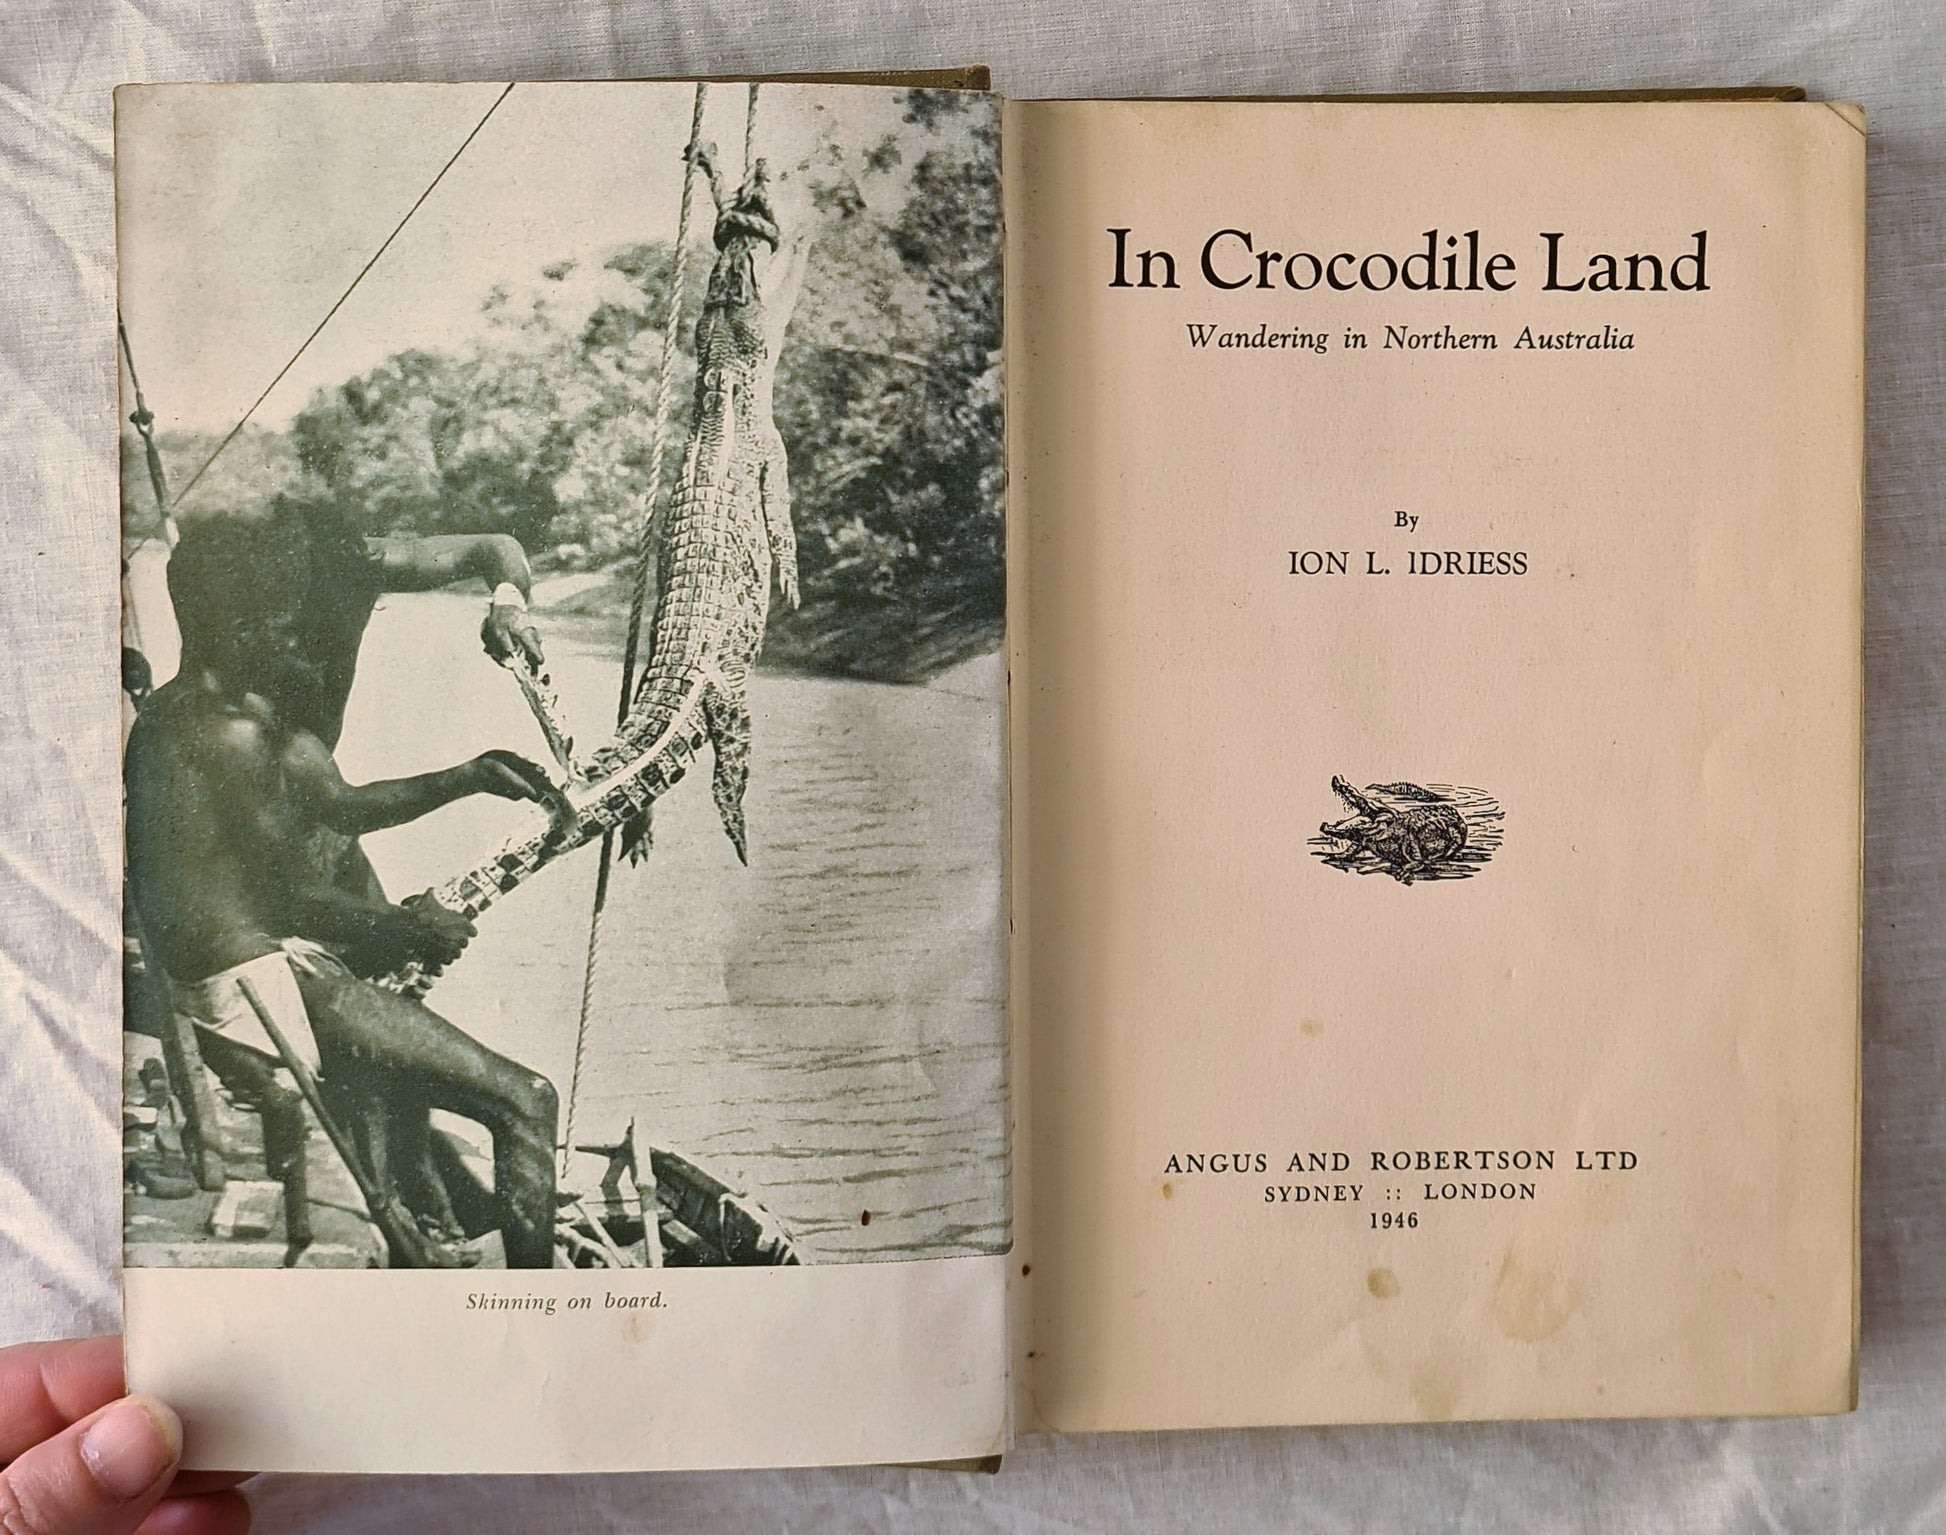 In Crocodile Land  Wandering in Northern Australia  by Ion L. Idriess